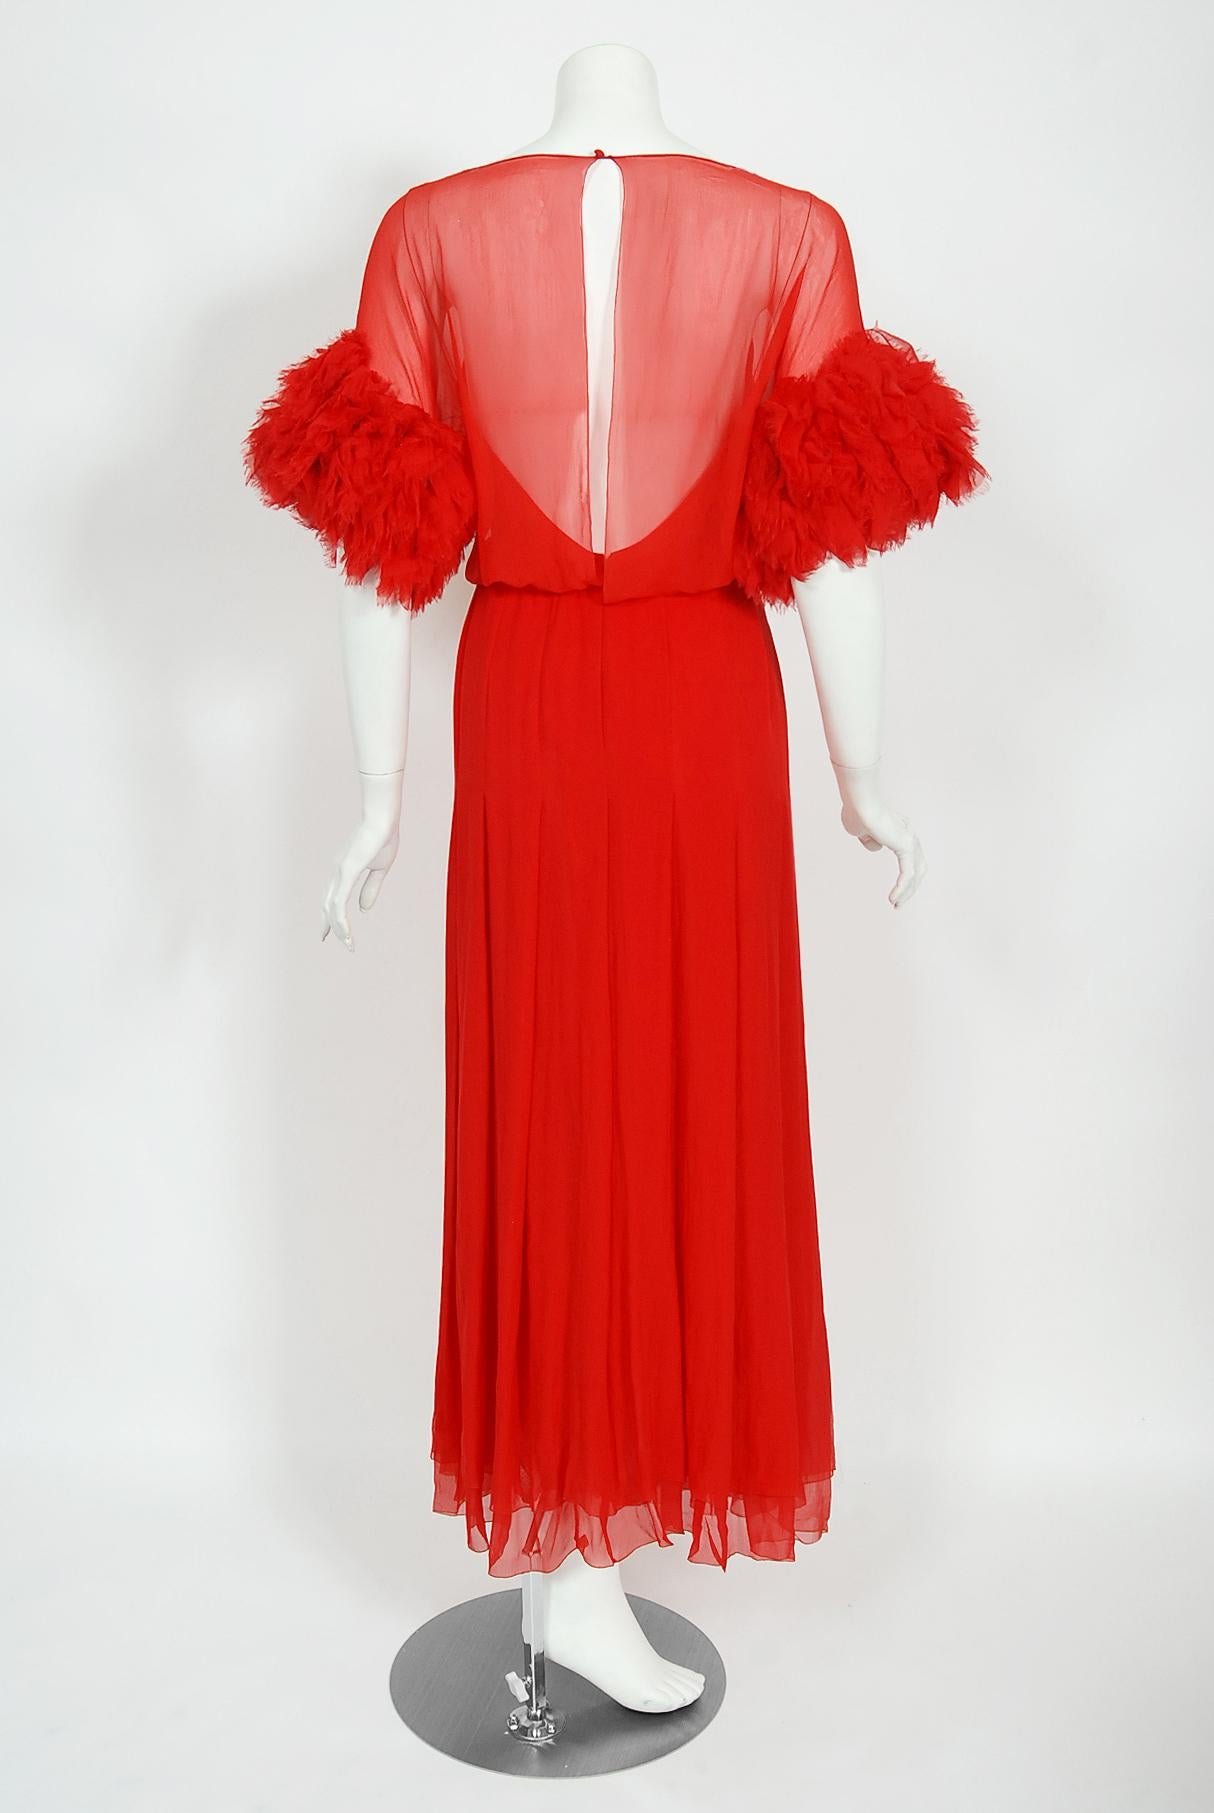 Vintage 1984 Chanel by Karl Lagerfeld Runway Red Silk Chiffon Ruffle-Sleeve Gown 6